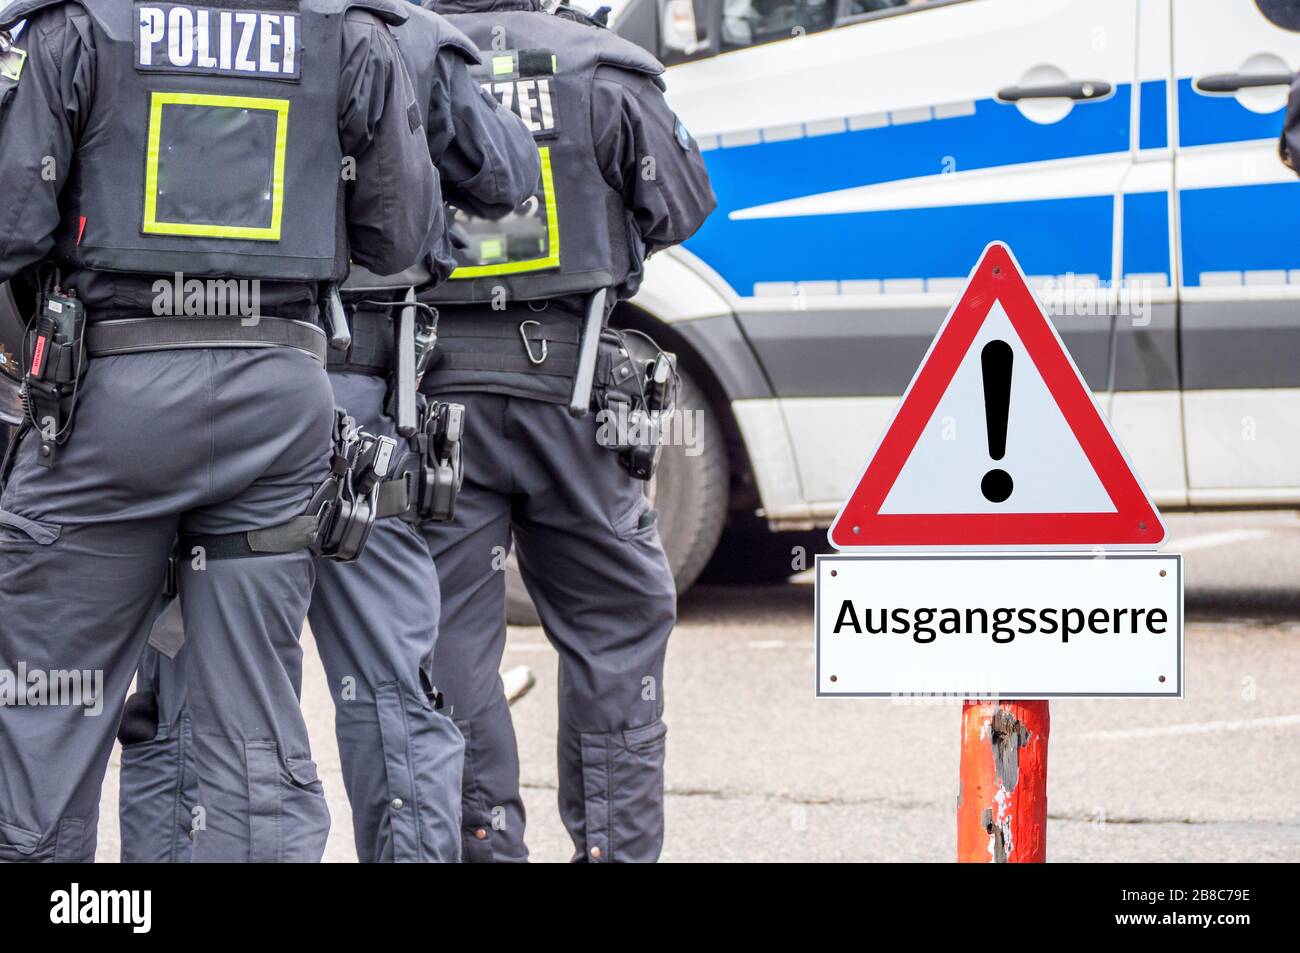 Police curfew warning sign in german background Stock Photo